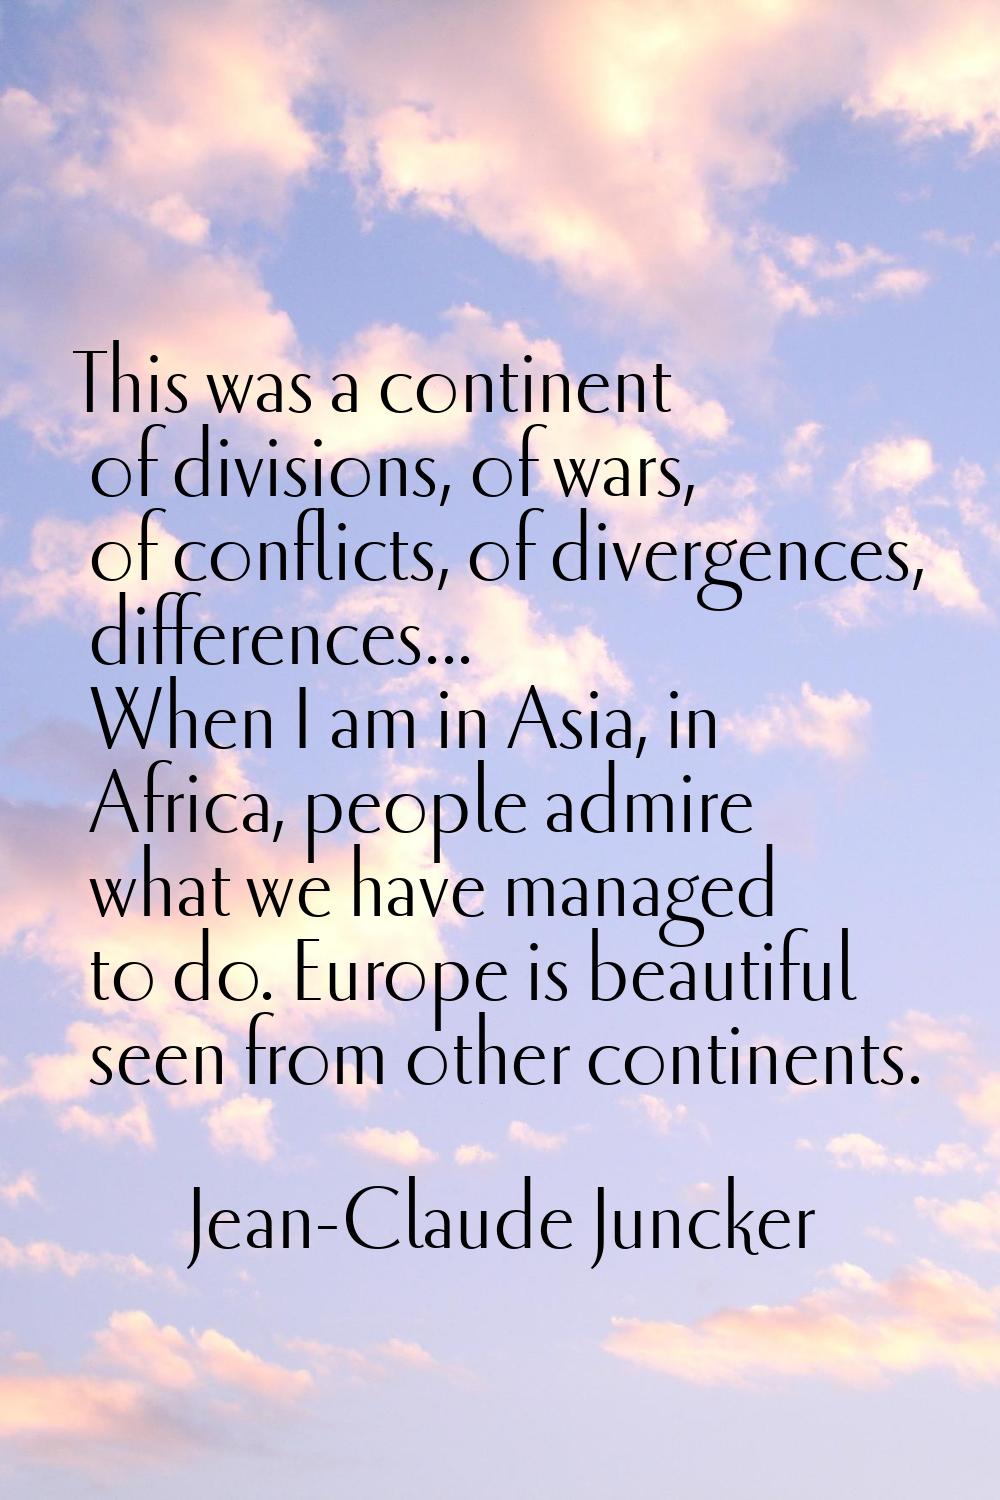 This was a continent of divisions, of wars, of conflicts, of divergences, differences... When I am 